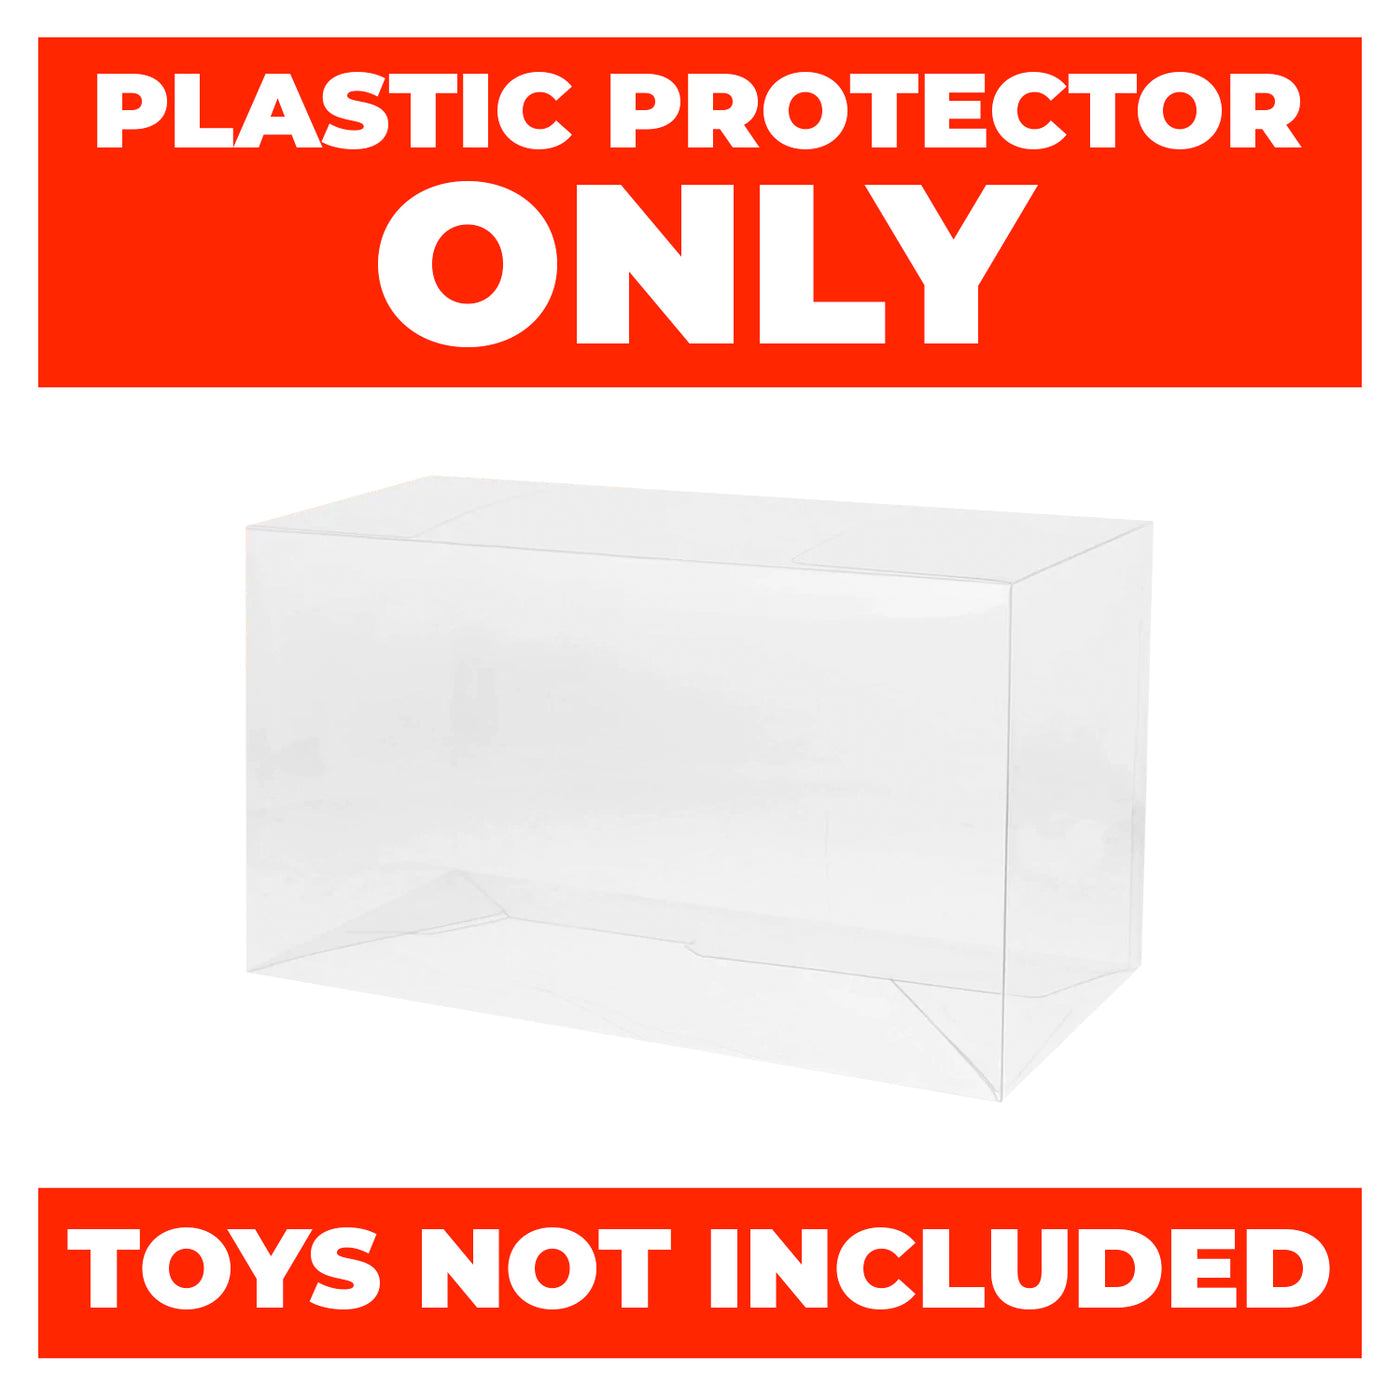 pop moment best funko pop protectors thick strong uv scratch flat top stack vinyl display geek plastic shield vaulted eco armor fits collect protect display case kollector protector